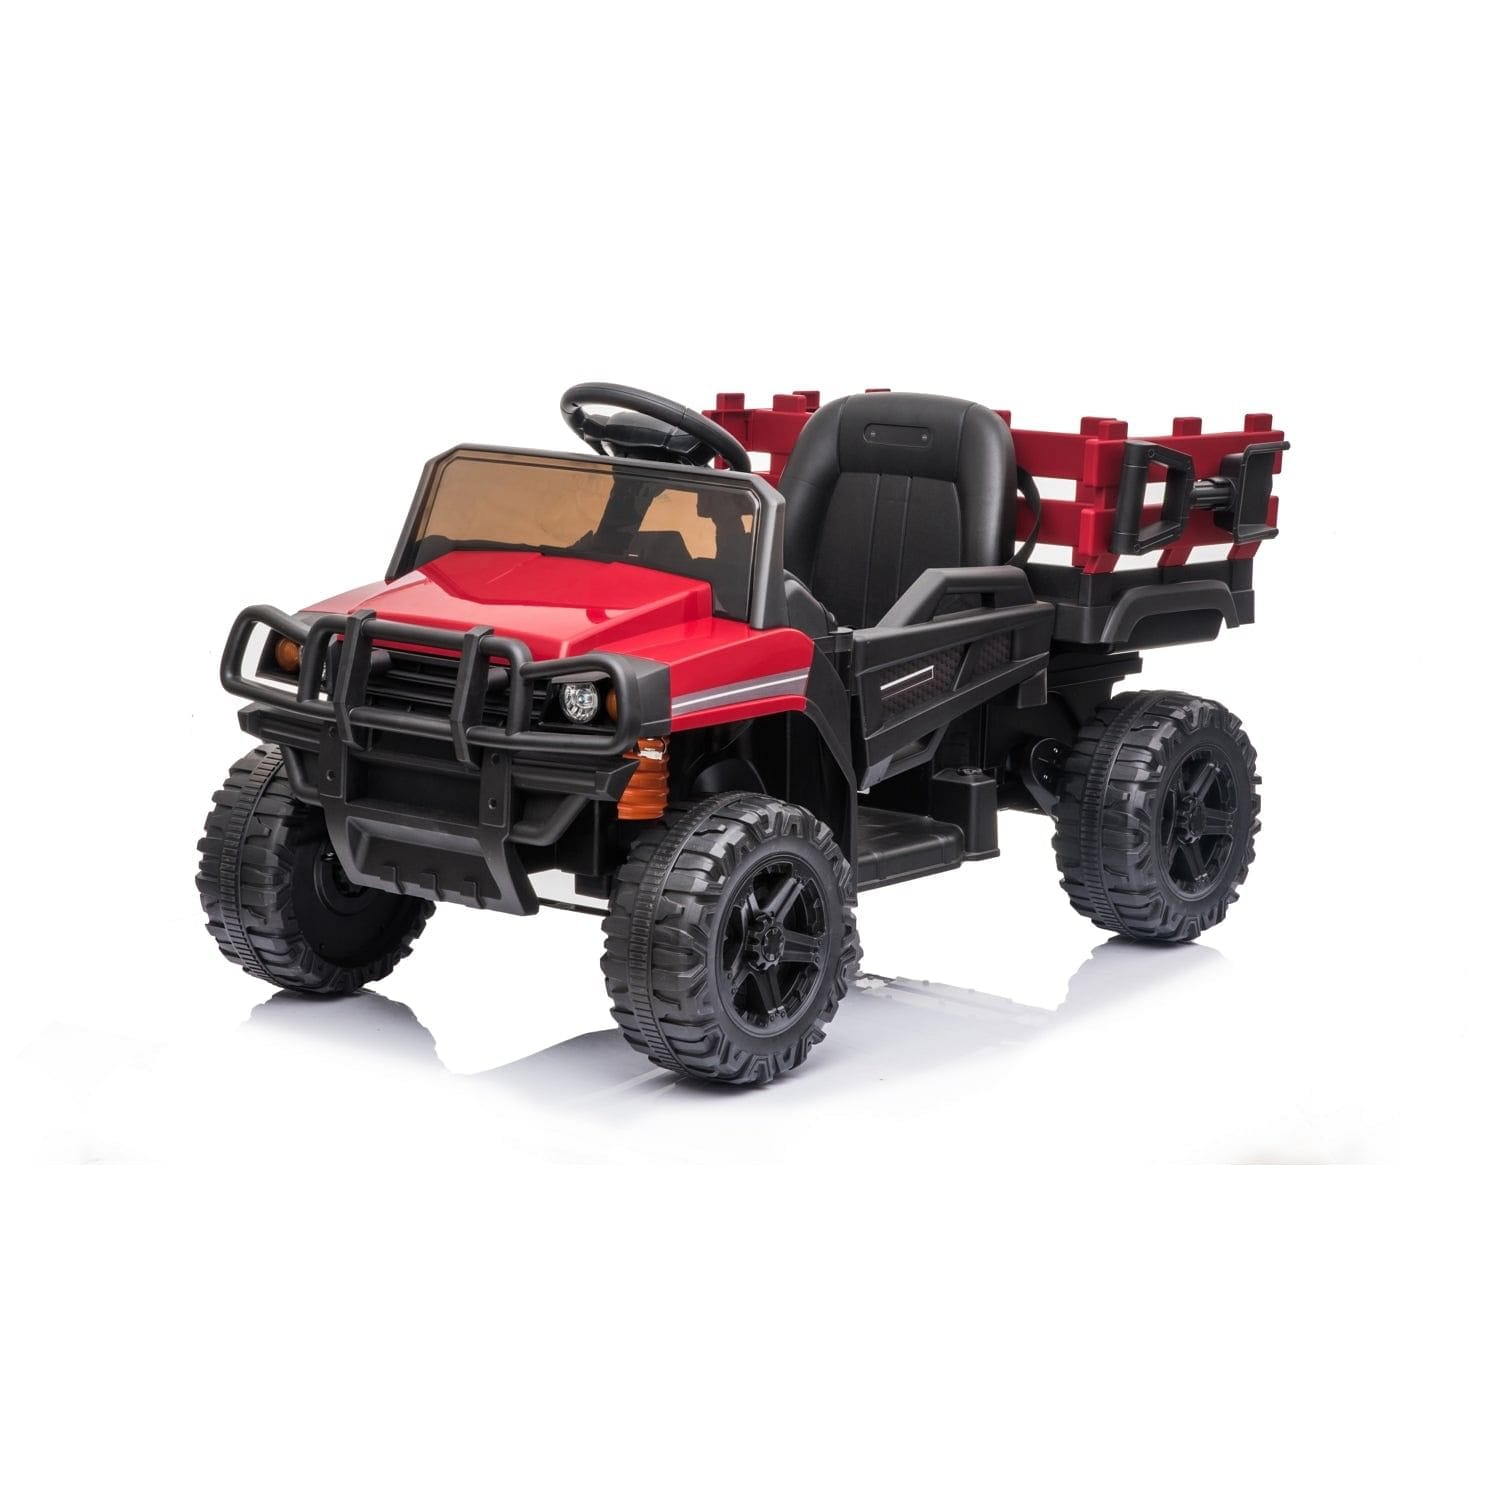 Ride on UTV with Trailer ,12v Rechargeable Battery Agricultural Vehicle Toy with 2 Speed,USB  Bluetooth Audio Electric Rugged Truck for Kids Toddler with Rear Bucket